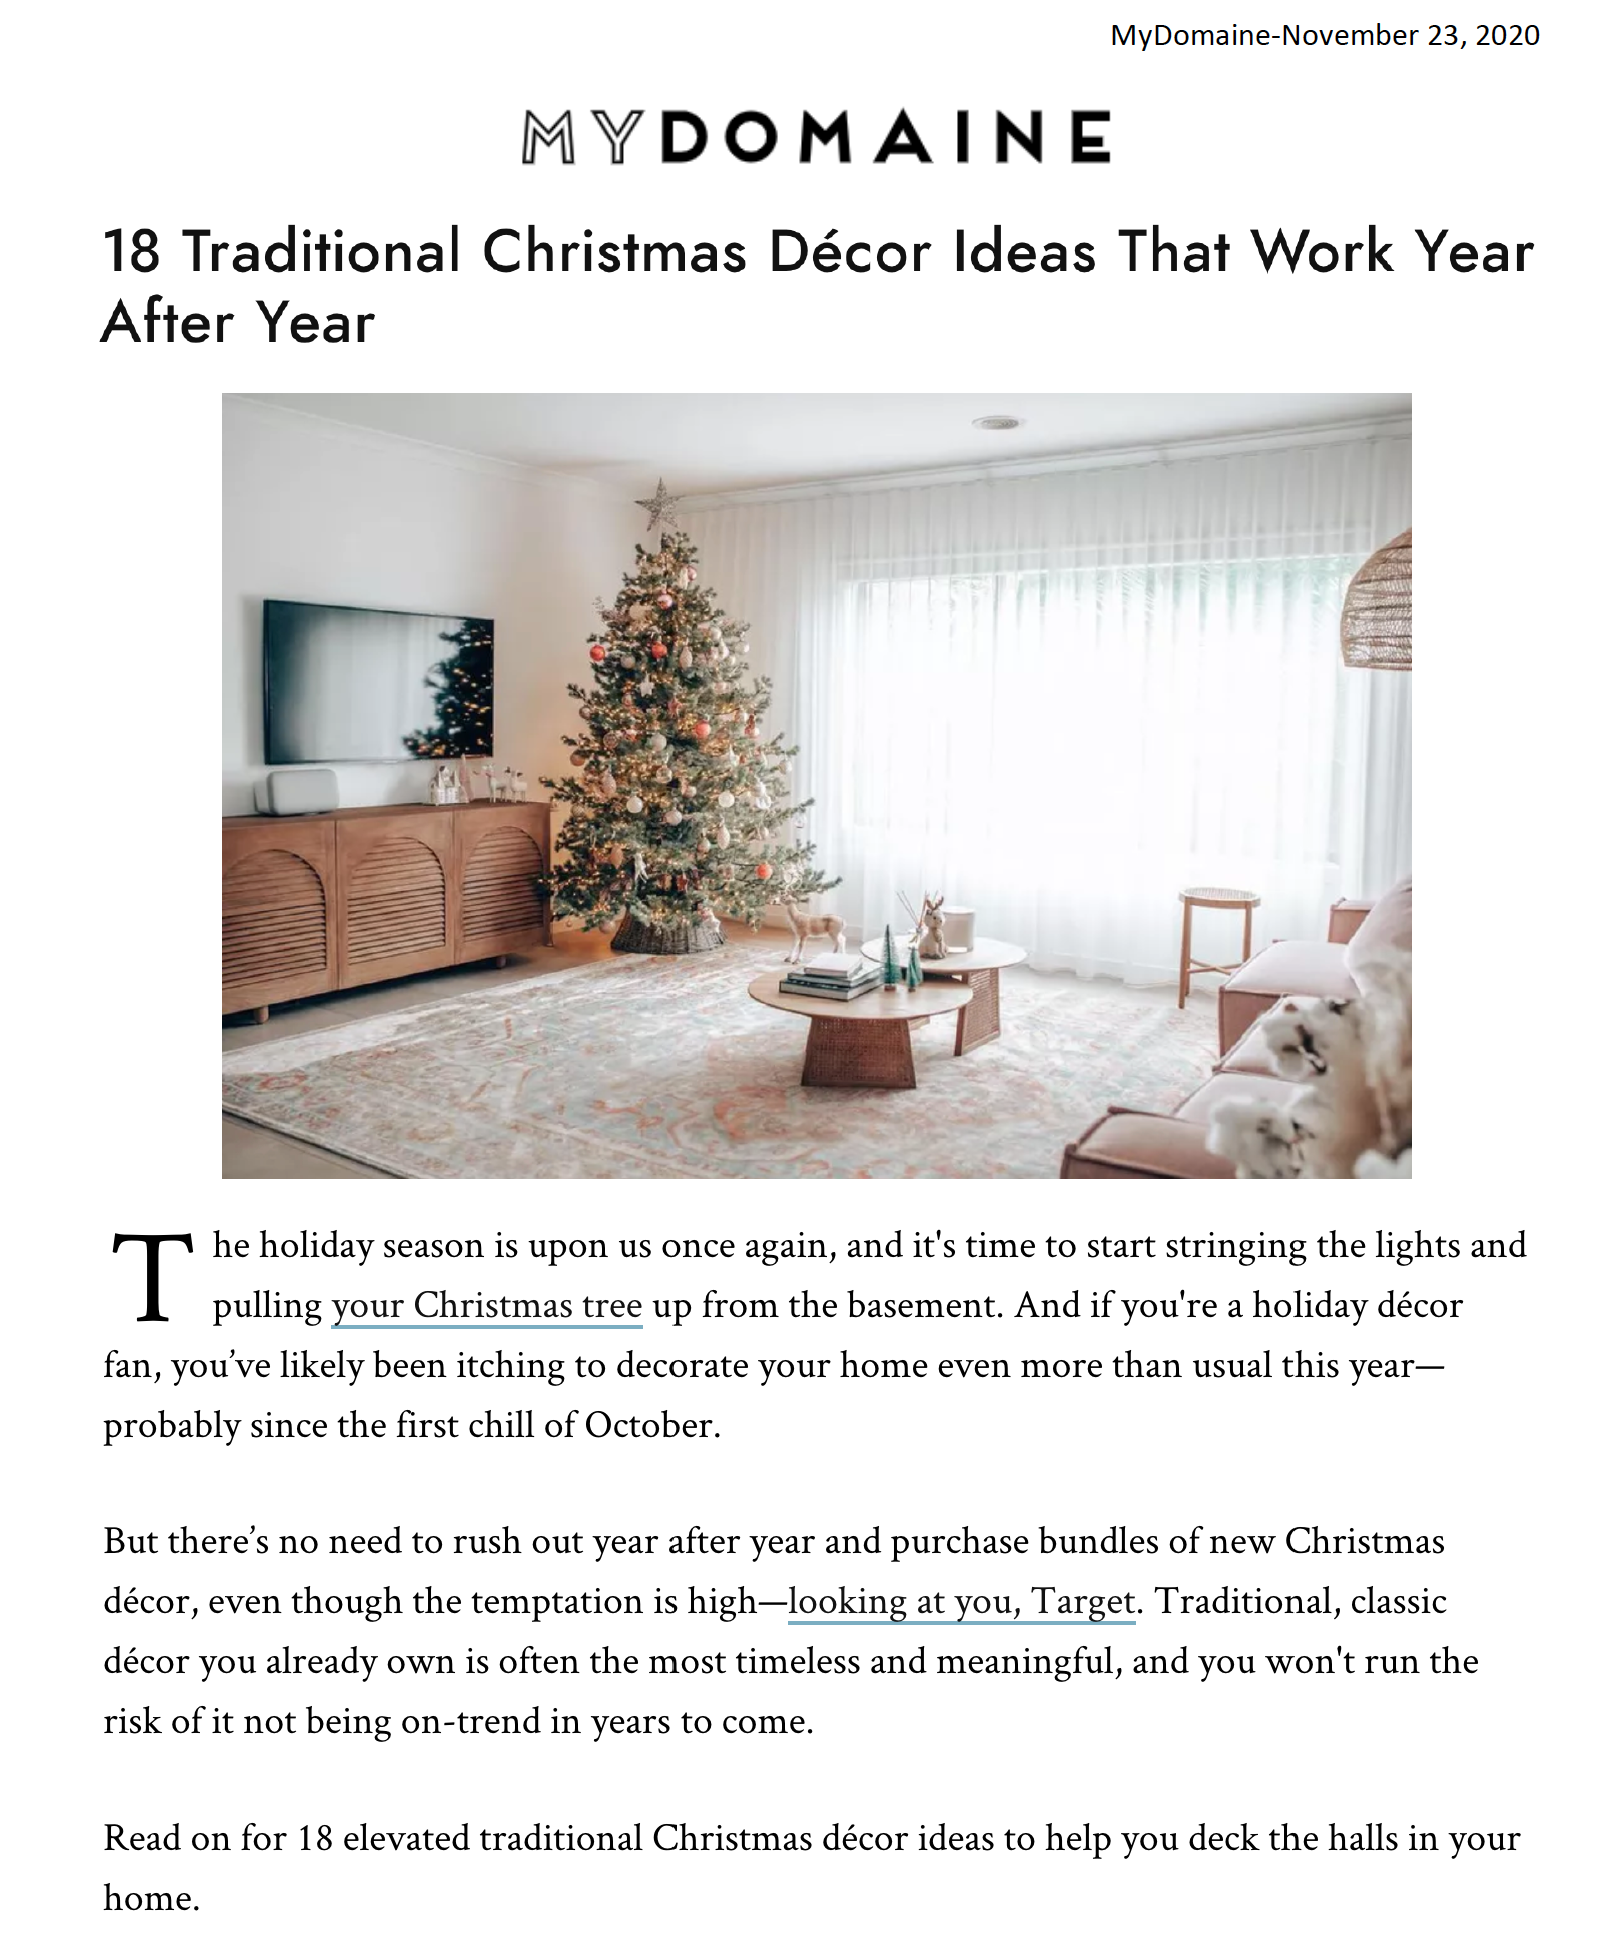 18 Traditional Christmas Décor Ideas That Work Year After Year